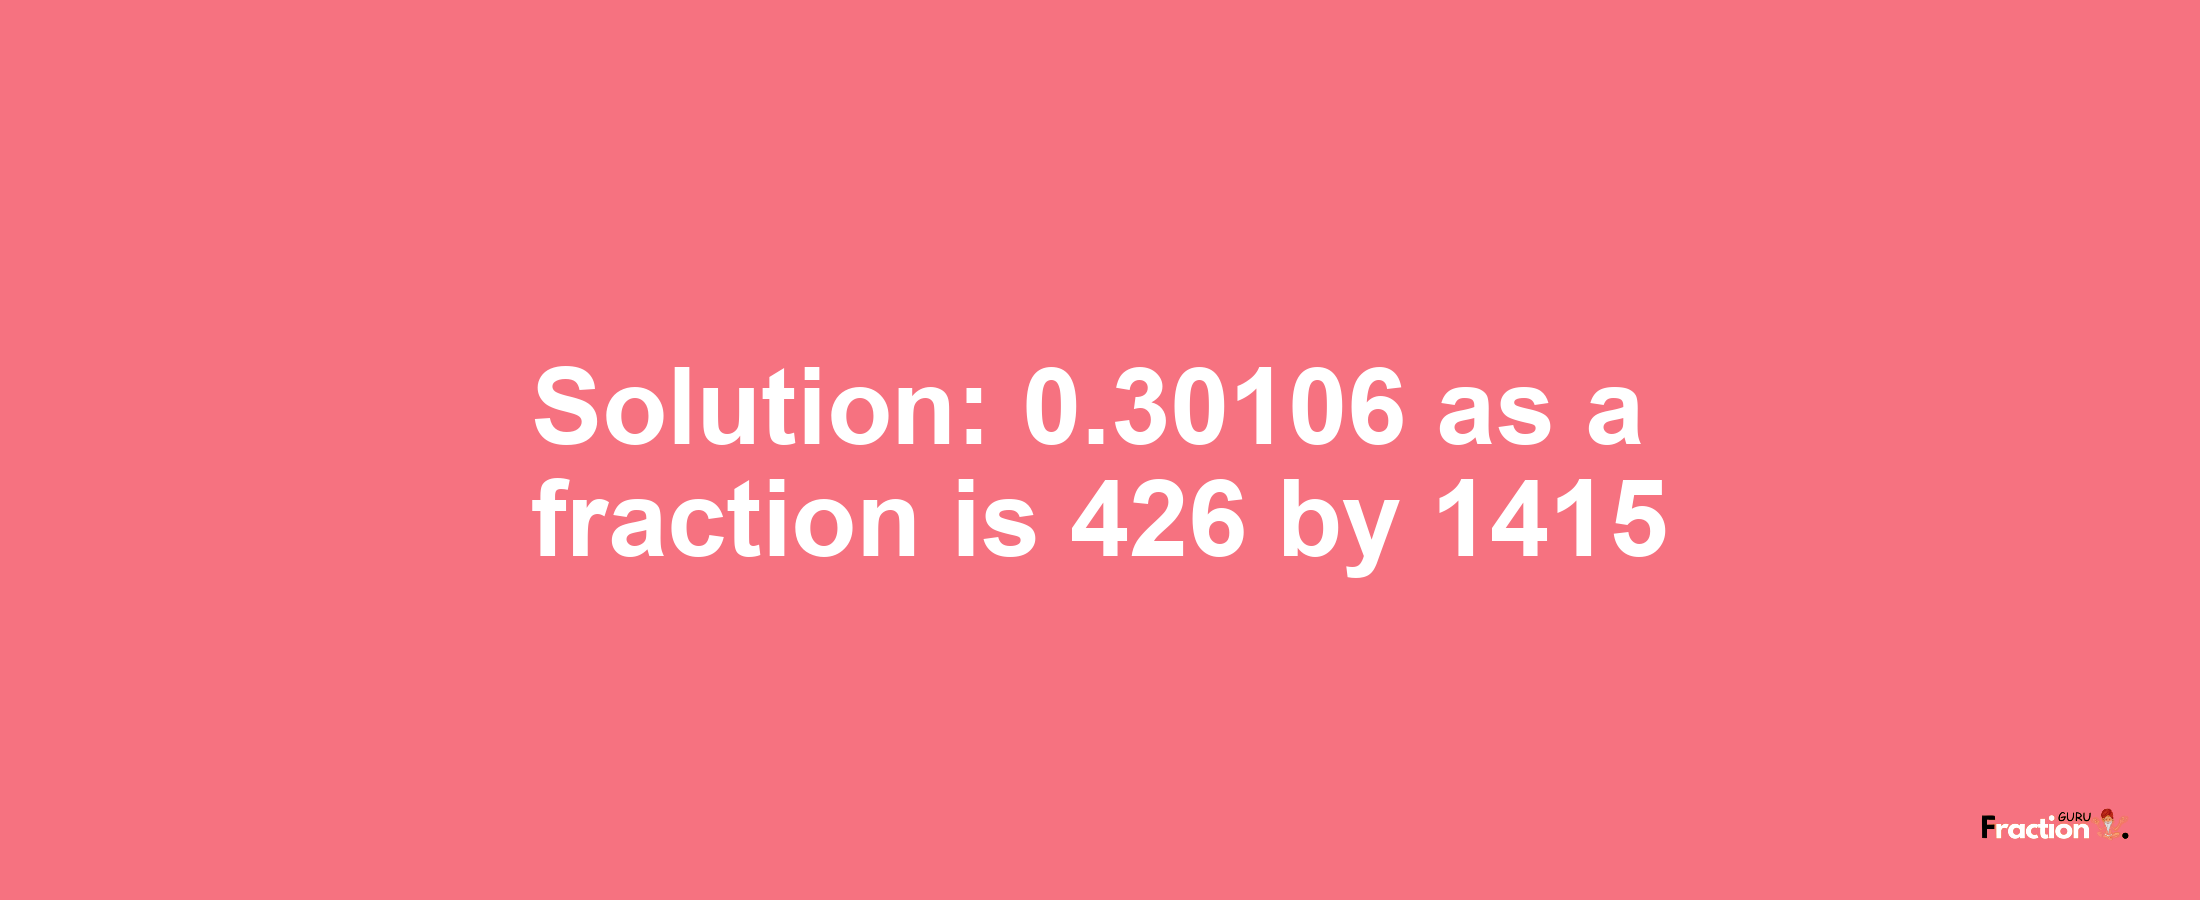 Solution:0.30106 as a fraction is 426/1415